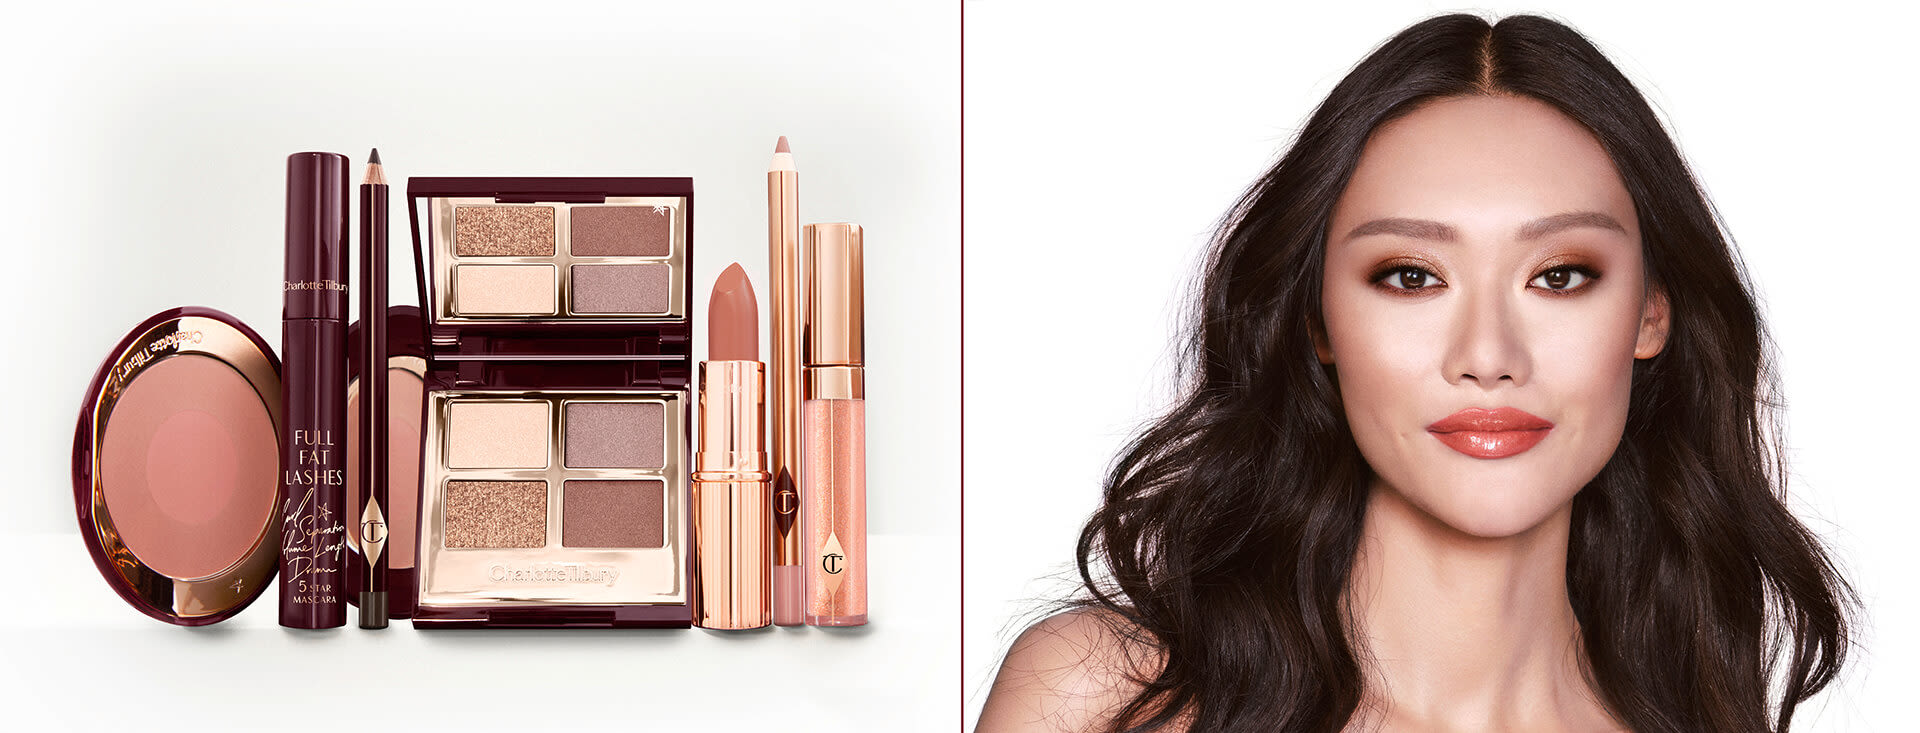 A fair-tone brunette model with brown eyes wearing shimmery brown eye makeup with orange-red lip gloss, bronzed cheeks, and glowy nude pink blush with an open, mirrored-lid eyeshadow palette in matte and shimmery gold, brown, and beige shades, an open black eyeliner pencil, a mascara in a dark-crimson colour scheme, a golden-peach lipstick with a matching lip liner pencil, nude-peach lip gloss, and an open two-tone blush in muted brown-pink. 